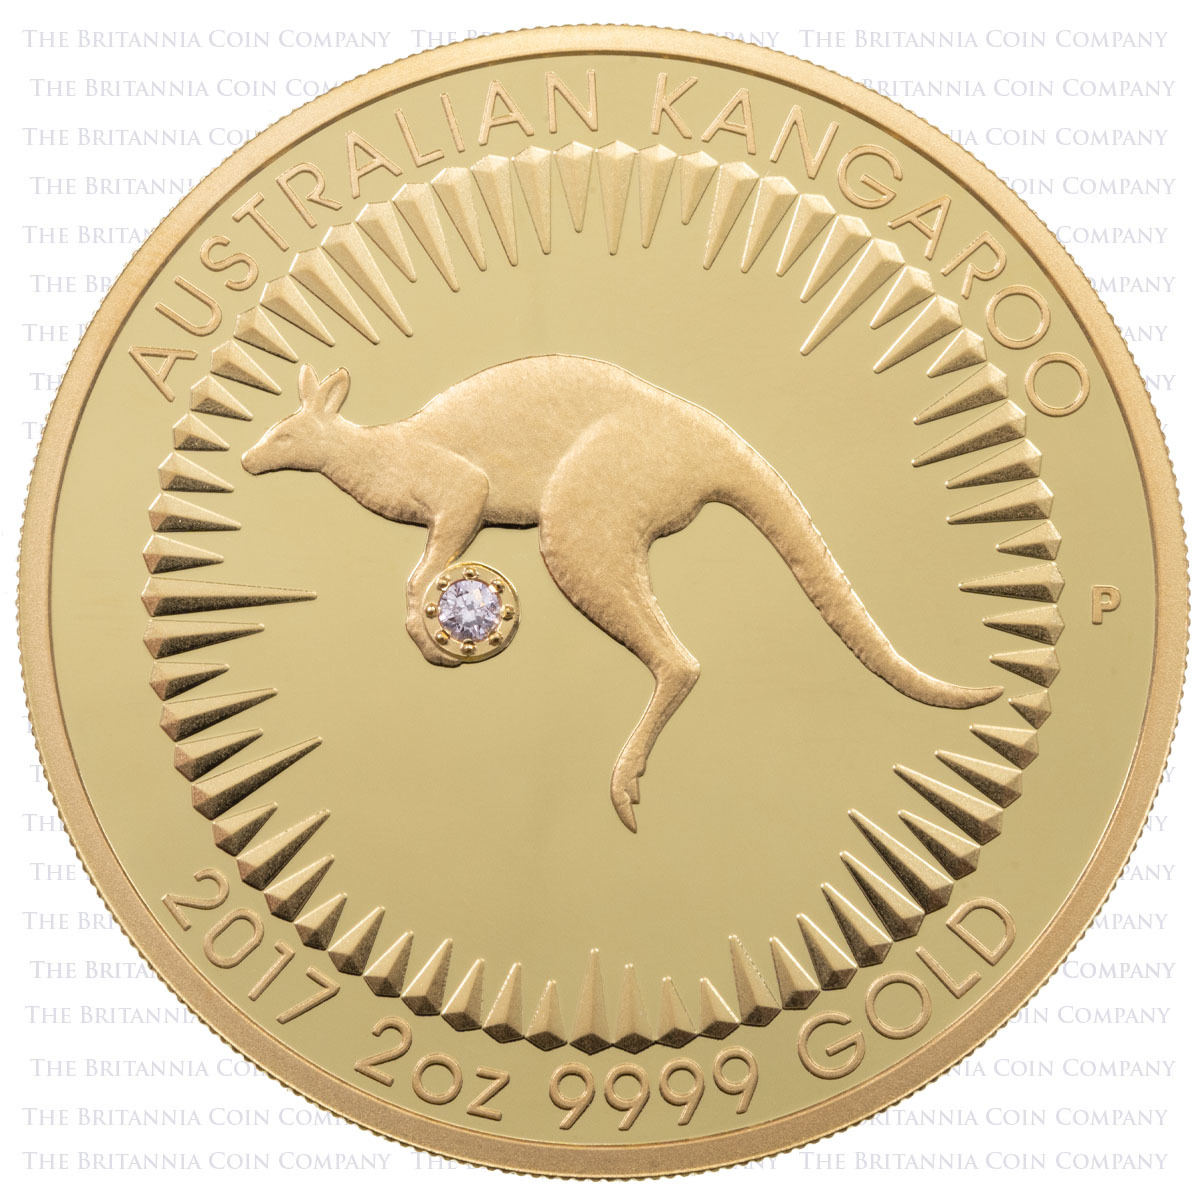 2017 Australia Perth Mint Kangaroo Two Ounce Gold Proof Coin With Argyle Pink Diamond Reverse